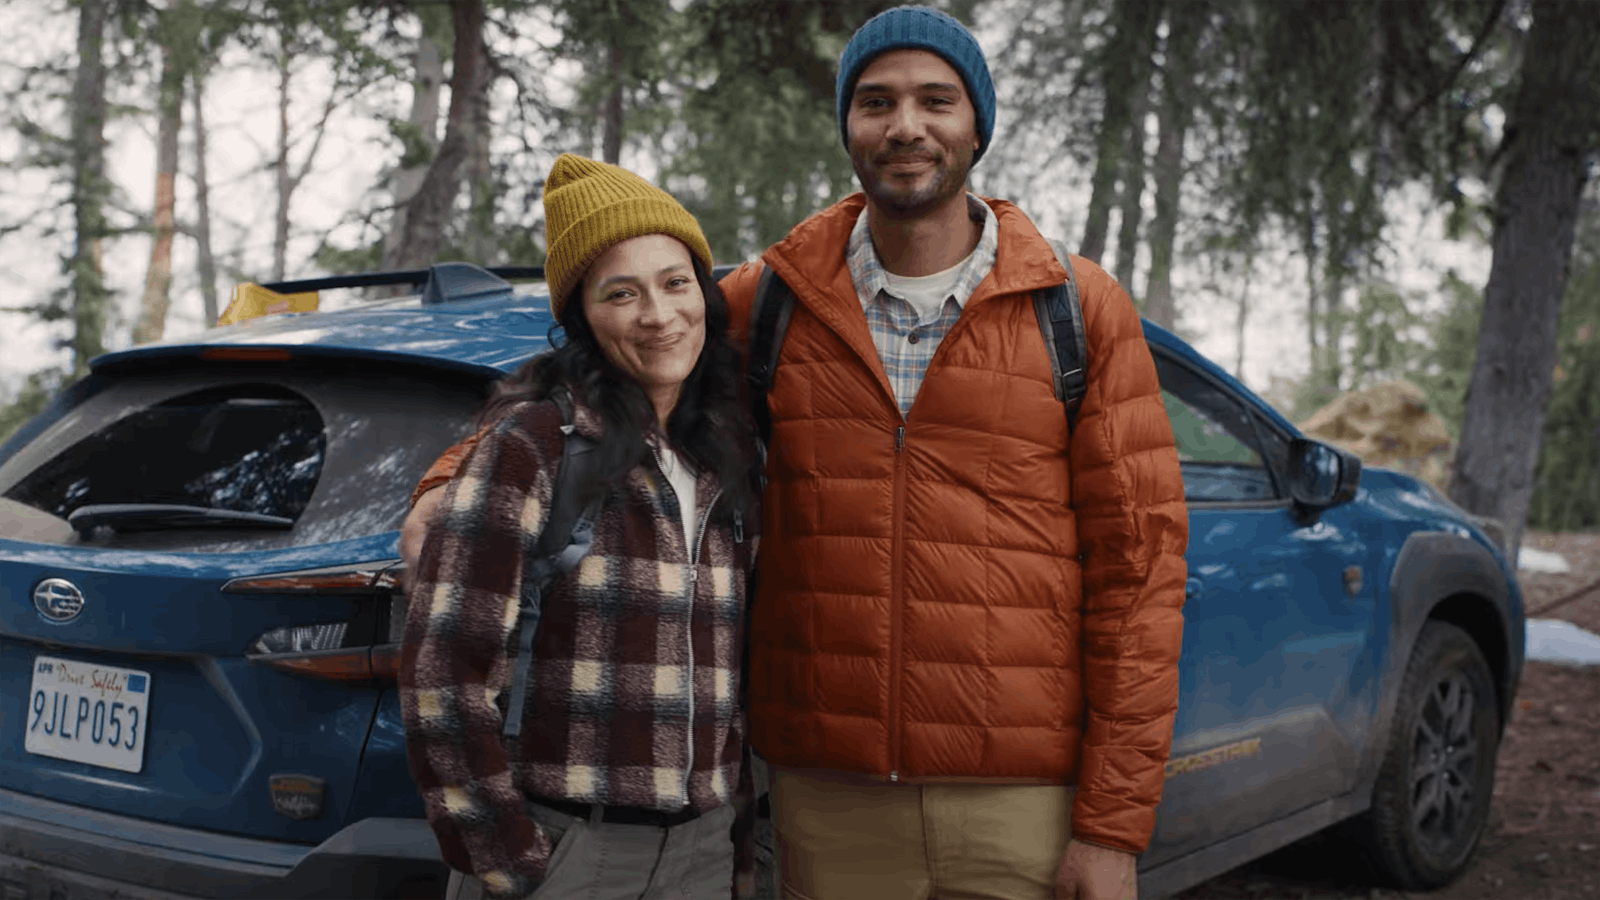 Two people stand in front of a car in a forest and smile for a camera